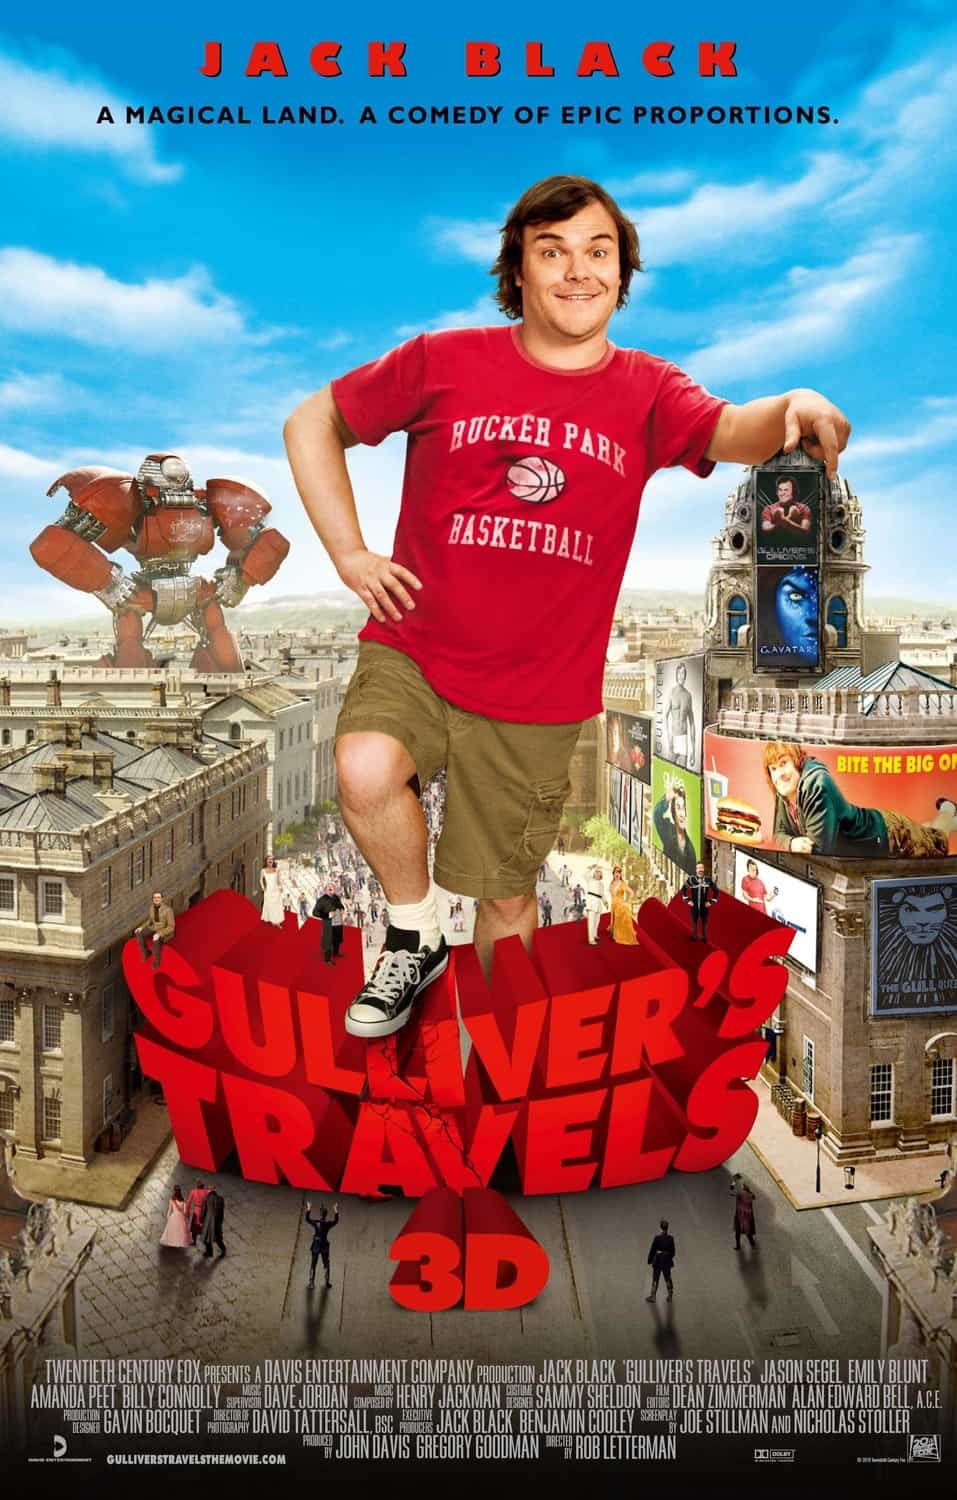 Gulliver Travels to the top for New Year UK box office